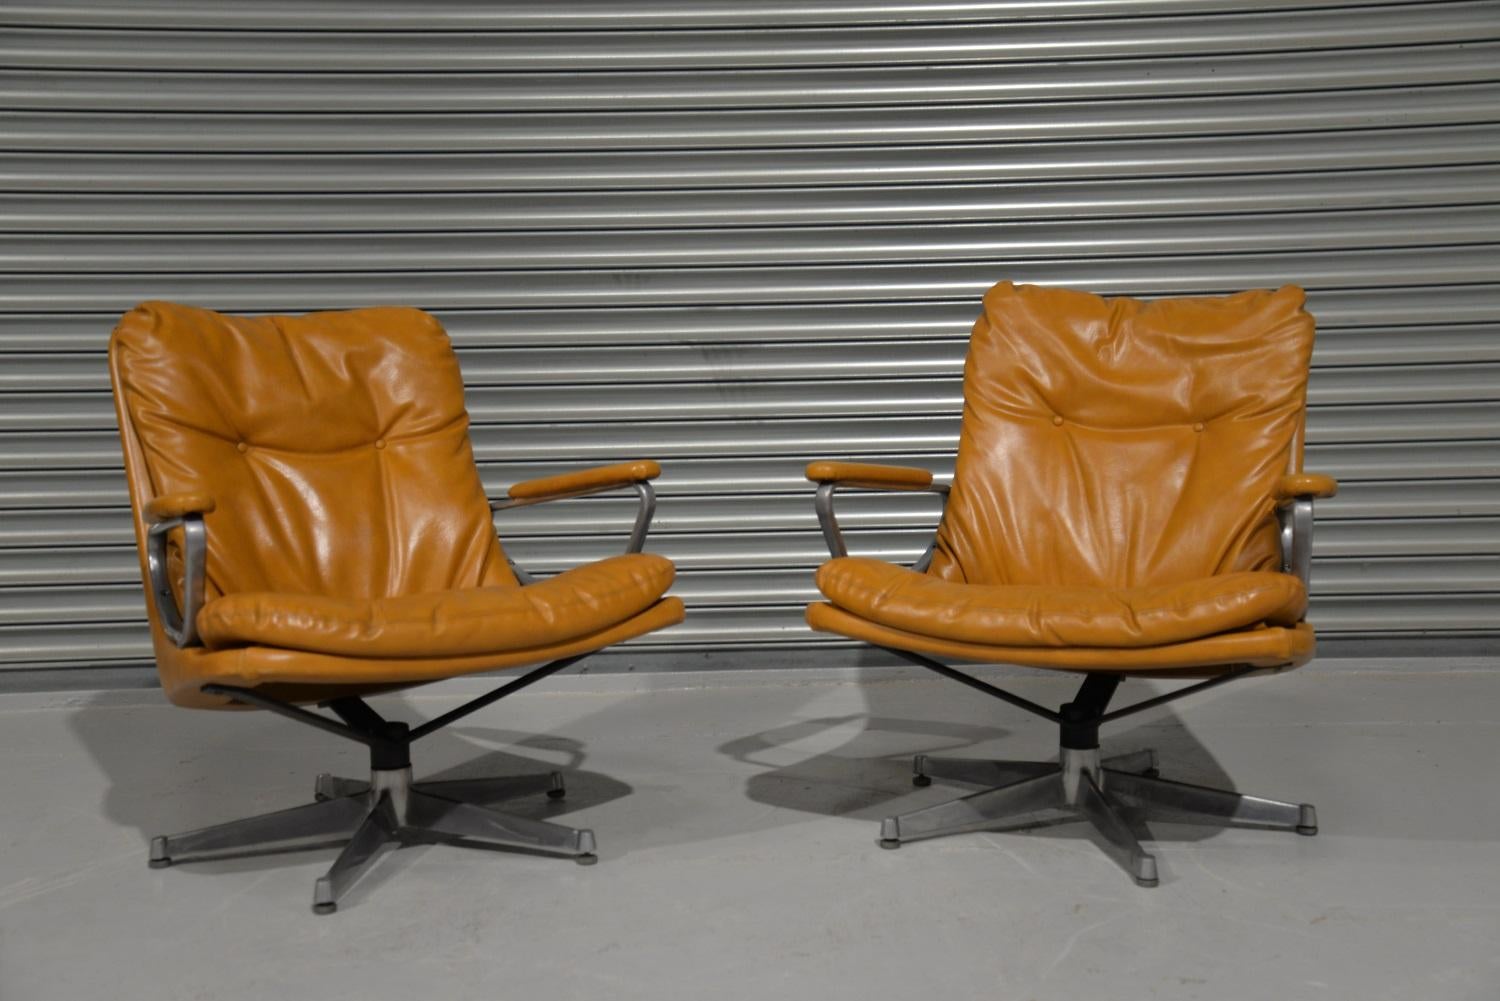 Discounted airfreight for our US and International customers ( from 2 weeks door to door) 

We bring to you a matching pair of vintage Gentilina lounge armchairs by Strässle of Switzerland. The sister chair to the King Chair by Strässle and